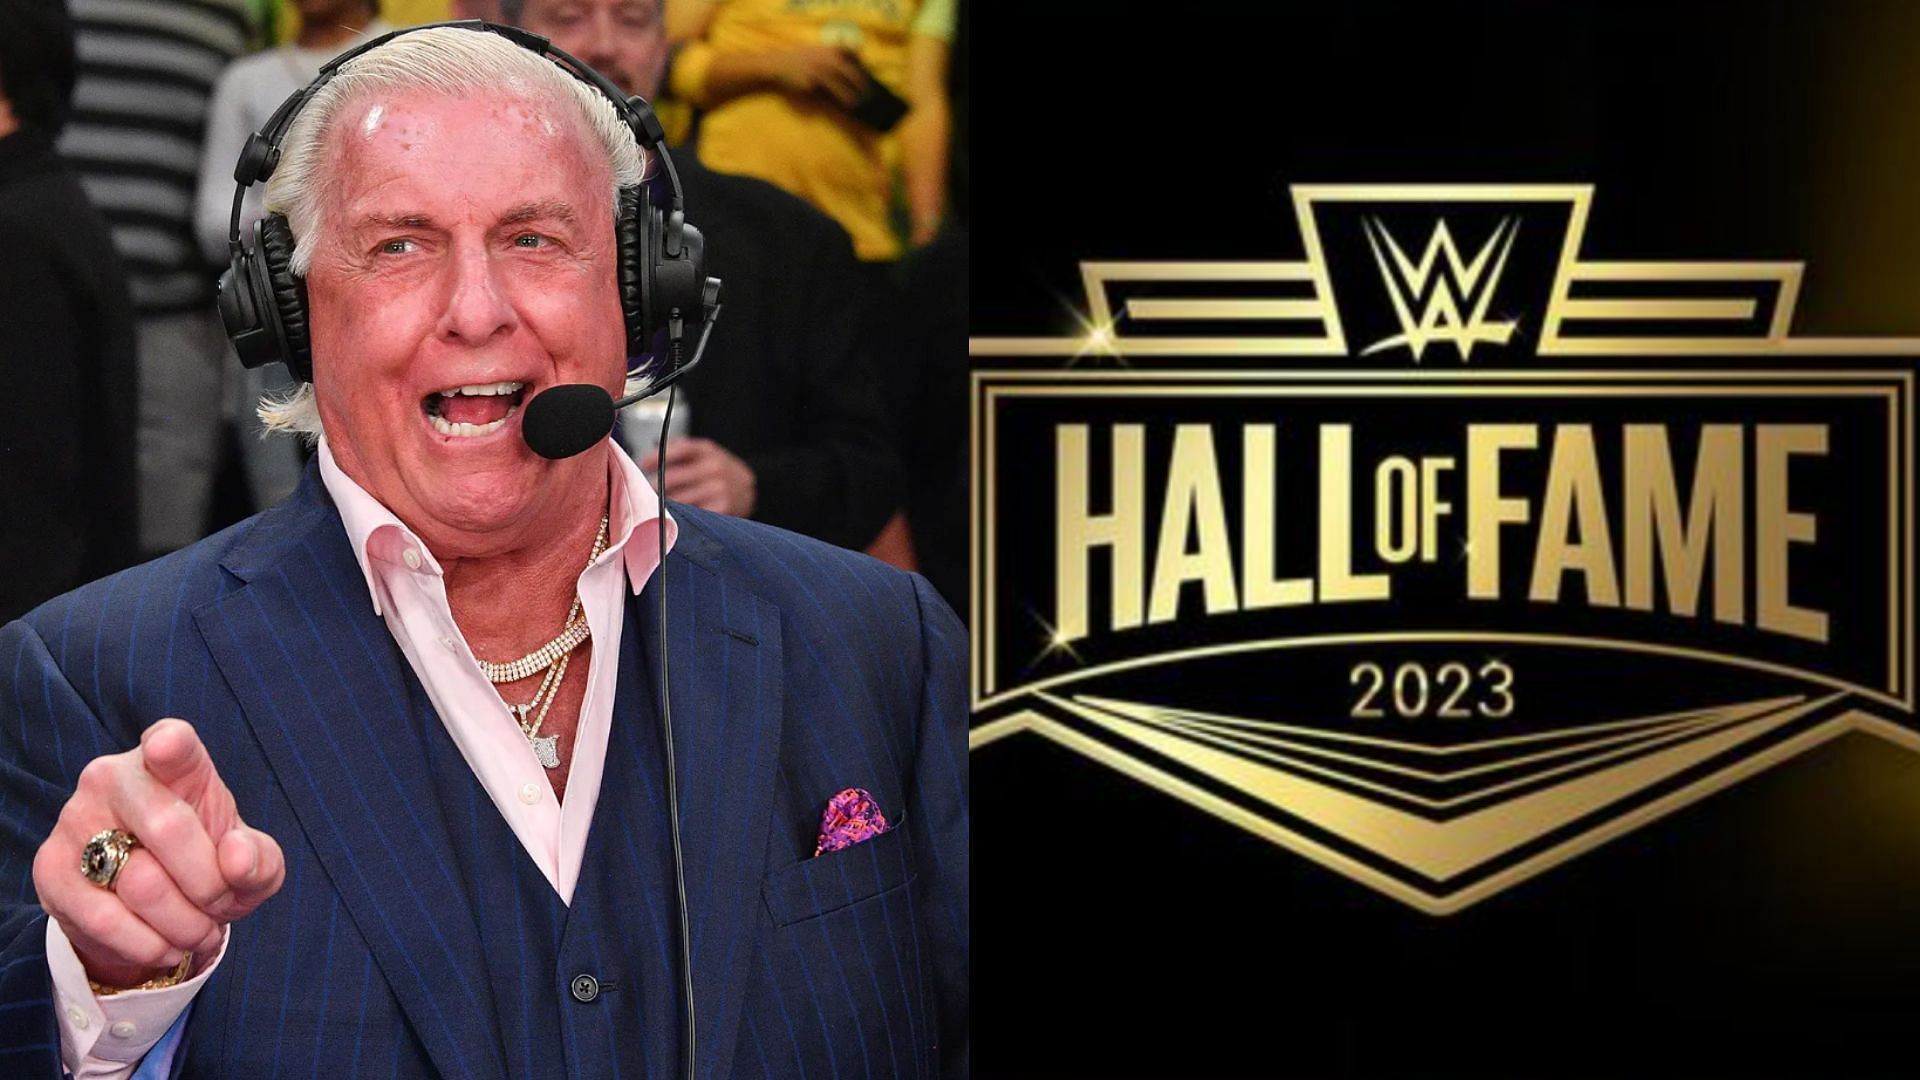 Ric Flair has announced another induction into the WWE Hall of Fame